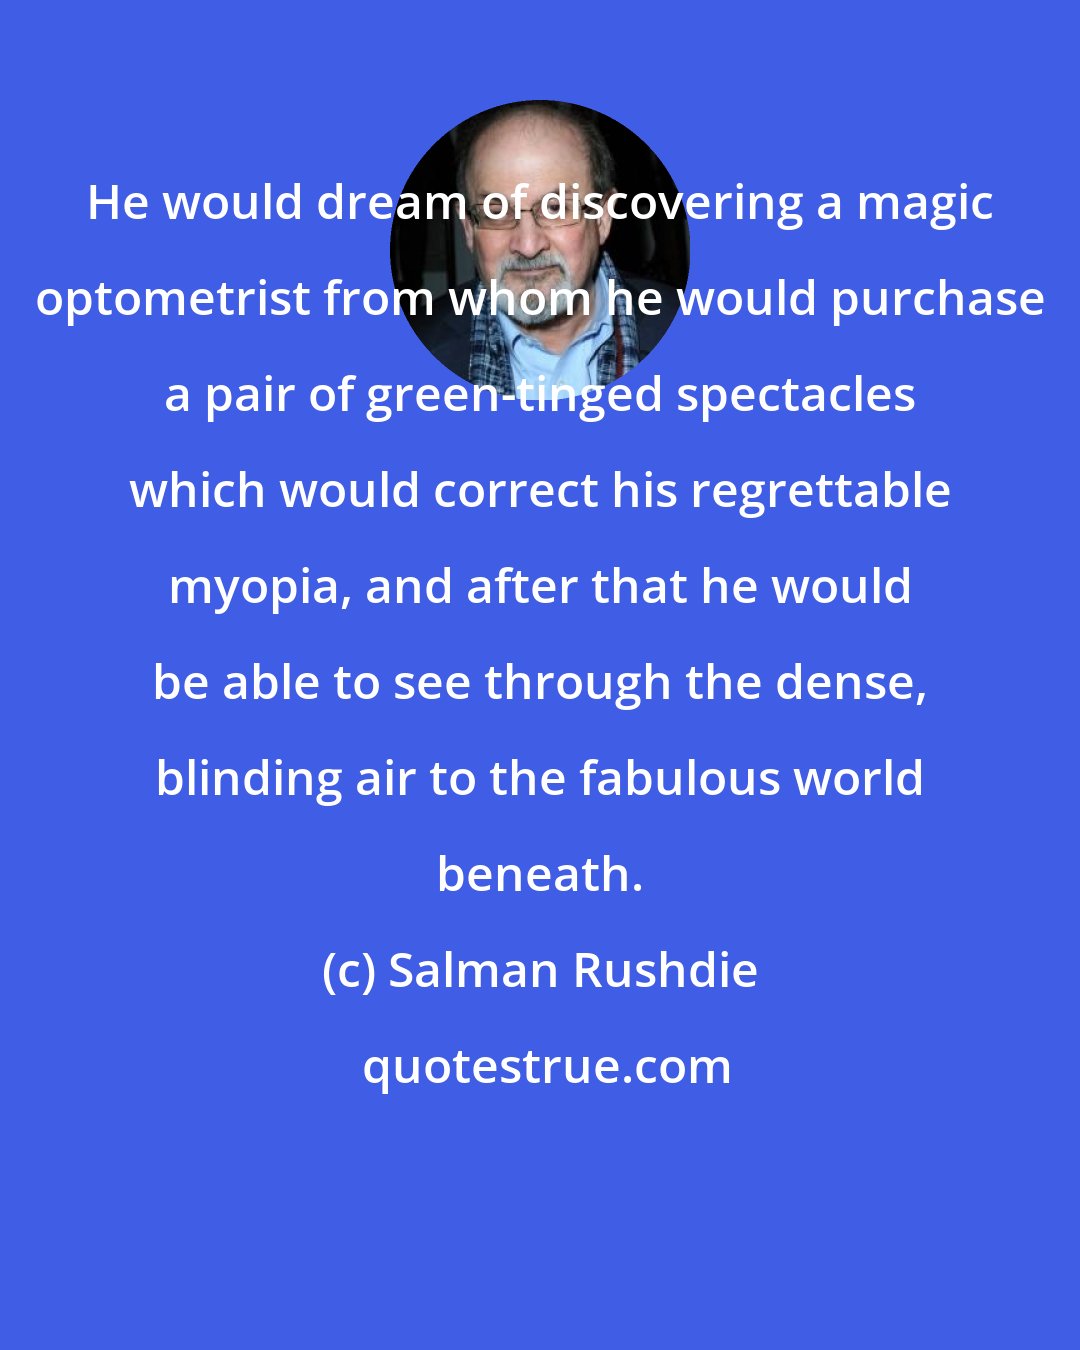 Salman Rushdie: He would dream of discovering a magic optometrist from whom he would purchase a pair of green-tinged spectacles which would correct his regrettable myopia, and after that he would be able to see through the dense, blinding air to the fabulous world beneath.